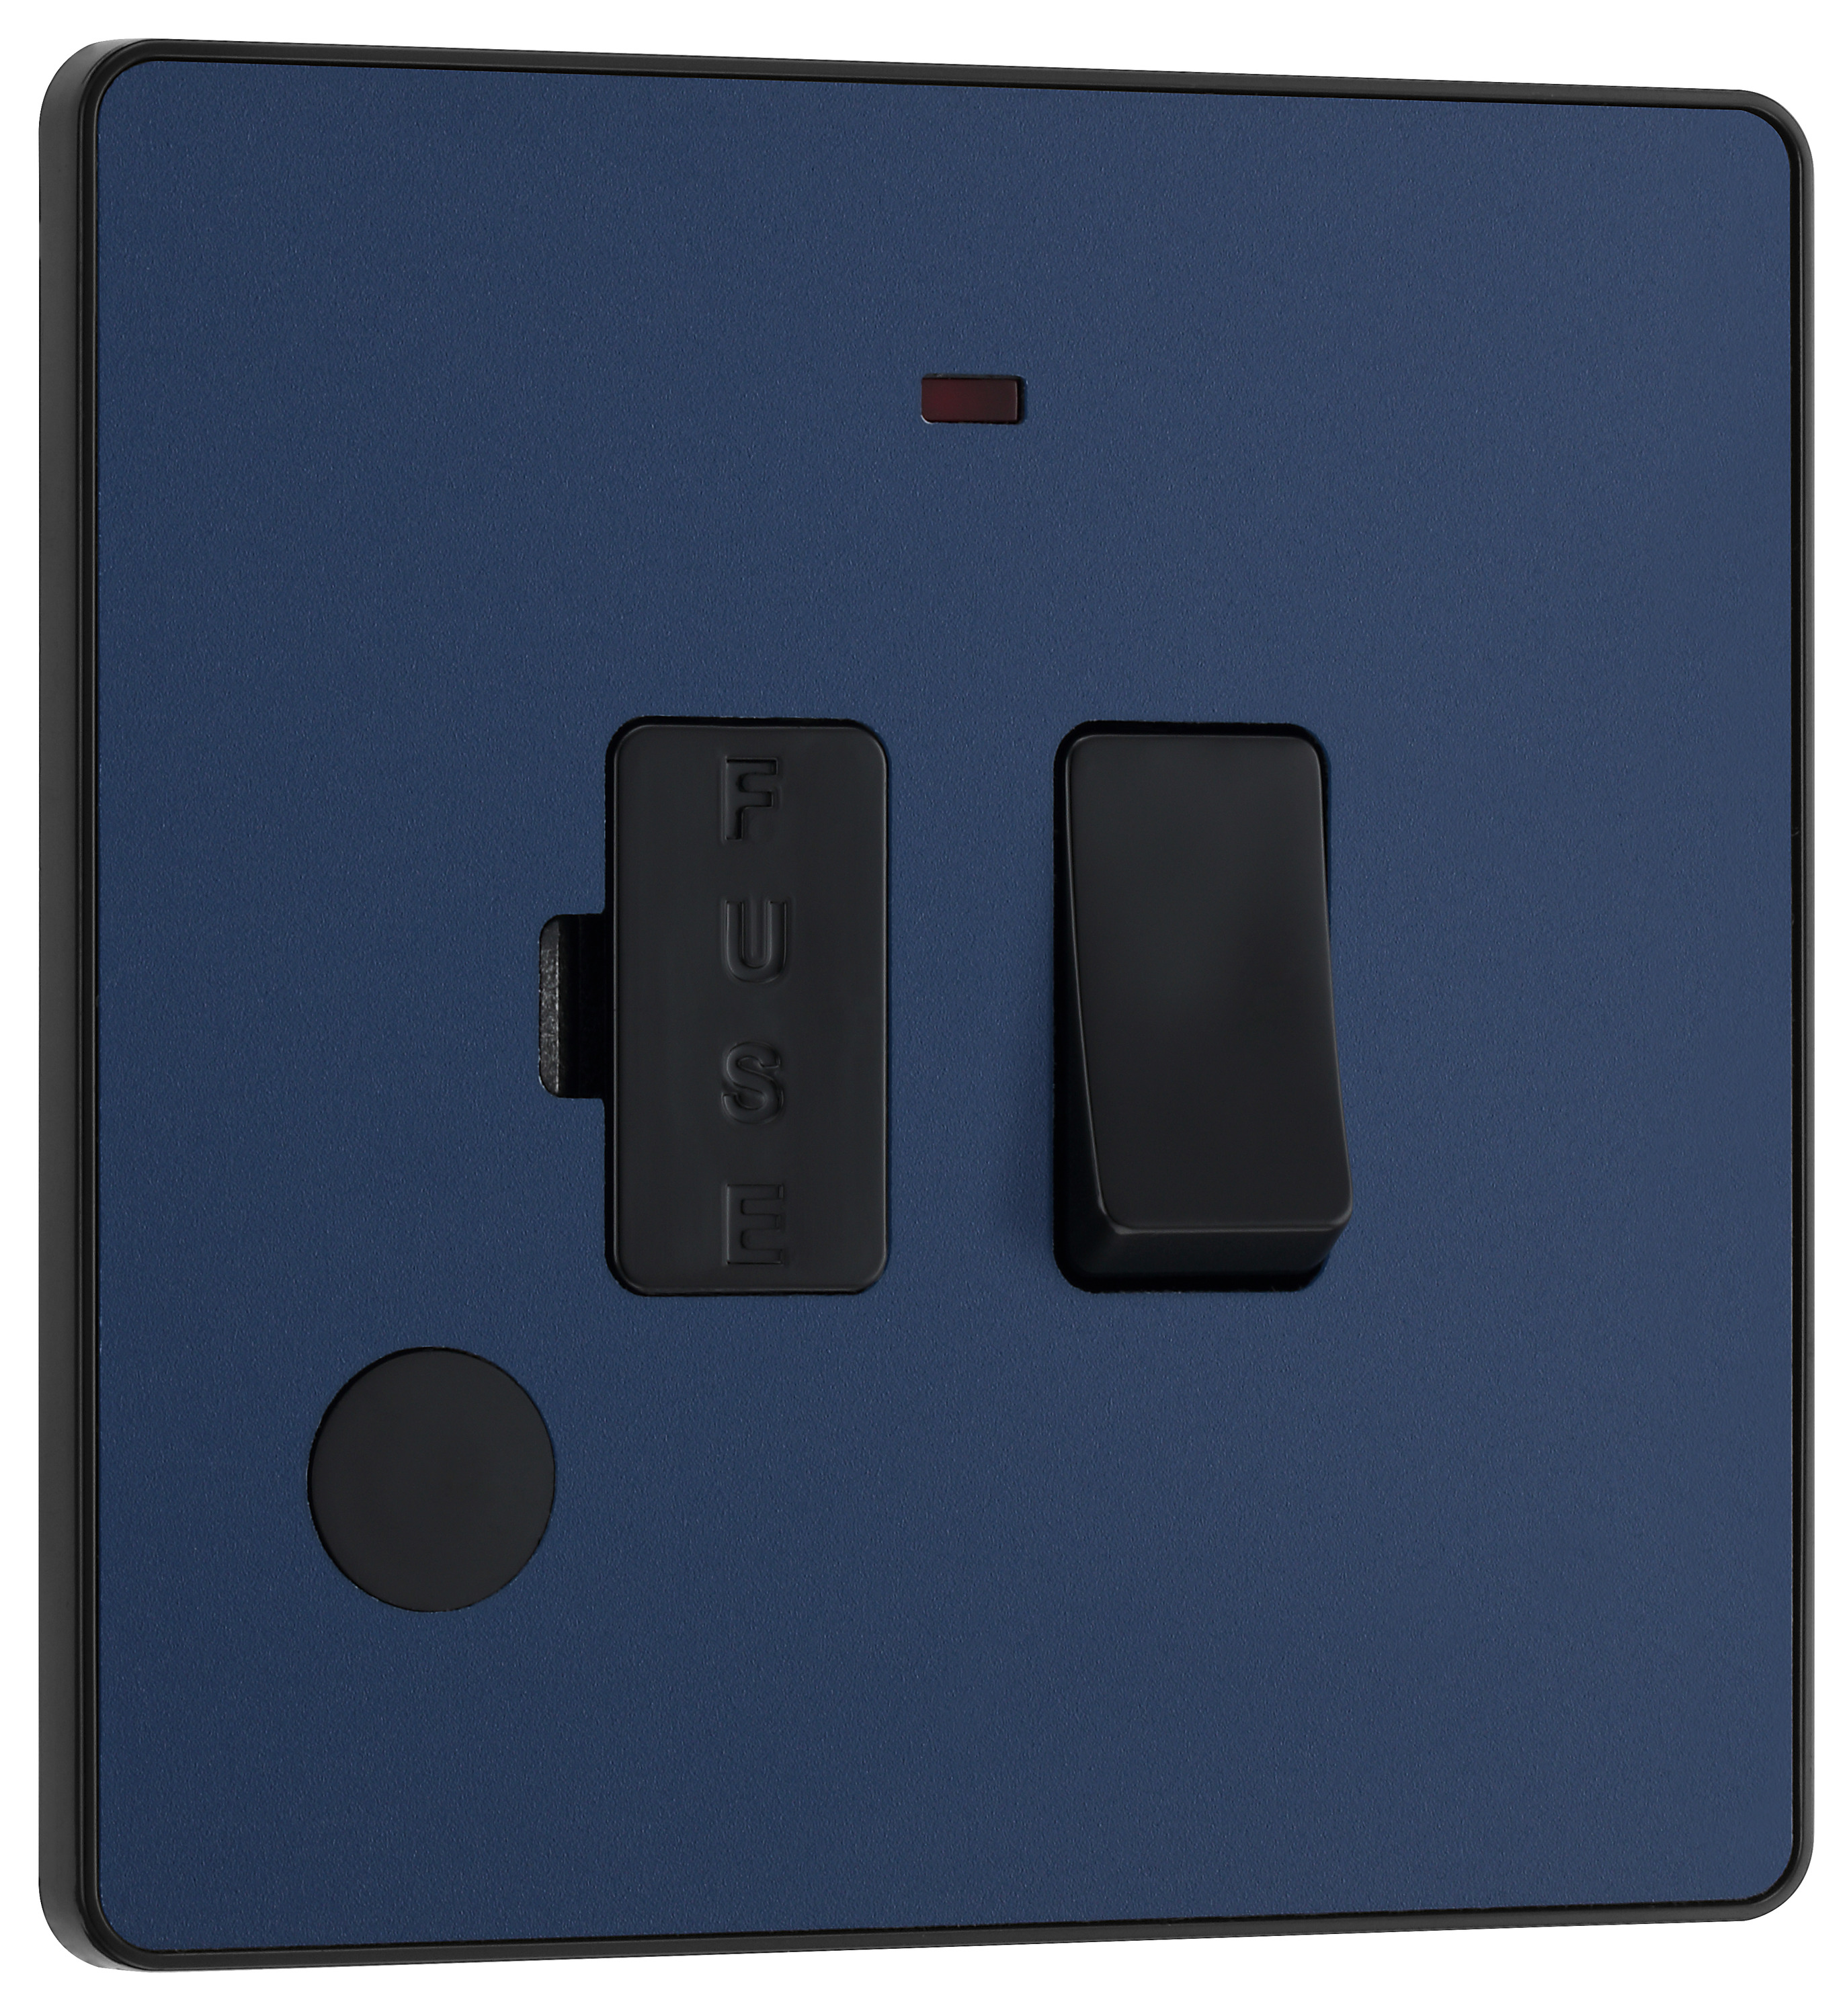 Image of BG Evolve Matt Blue 13A Switched Fused Connection Unit with Power Led Indicator & Flex Outlet